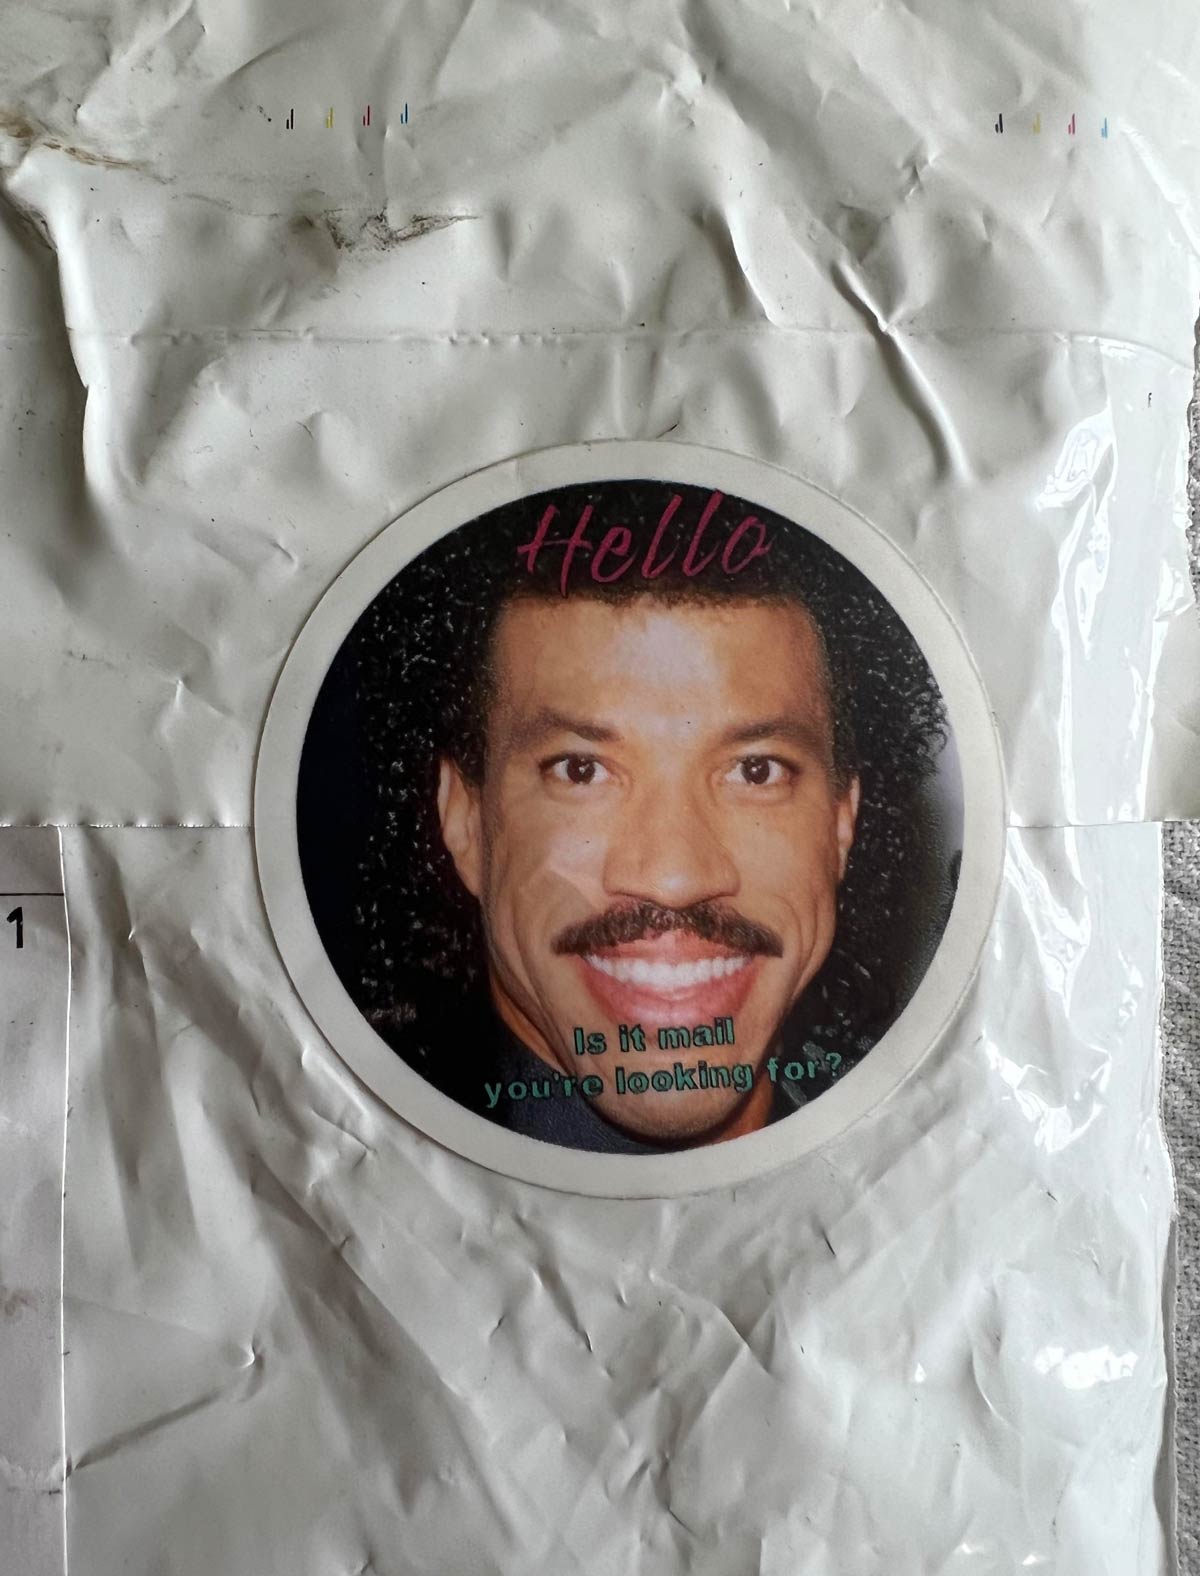 Lionel on a package I just received